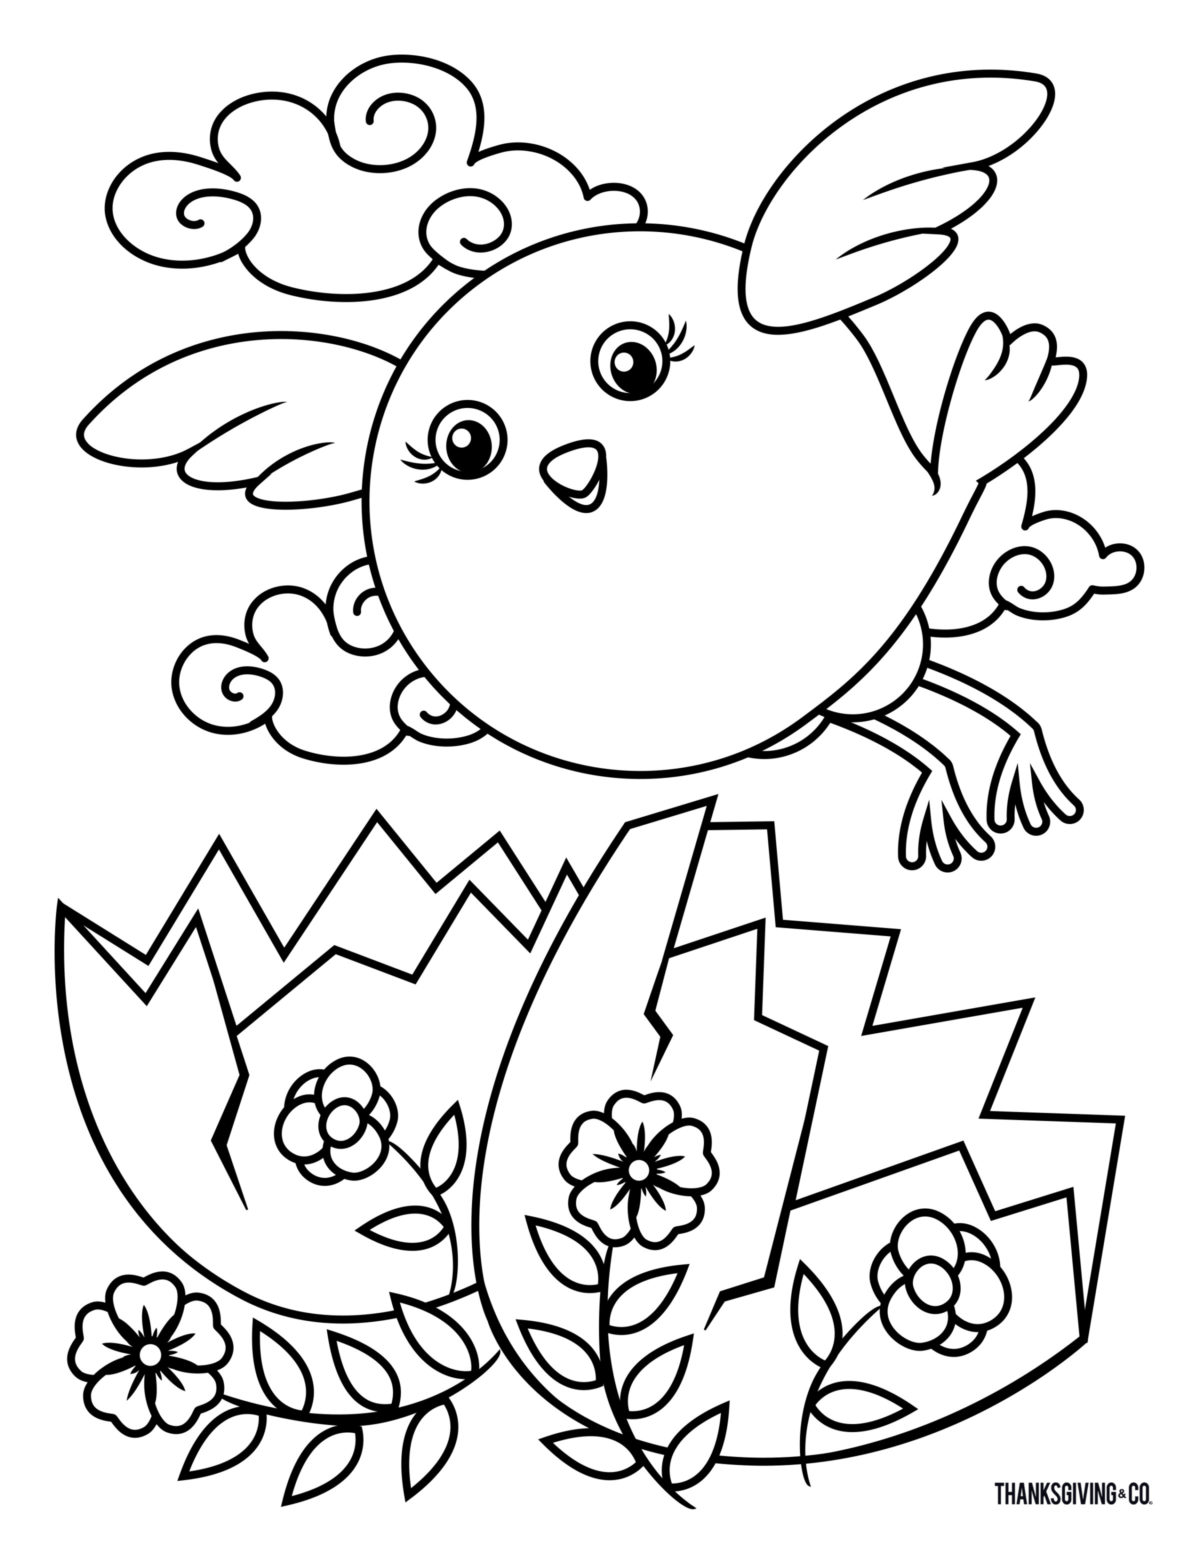 Celebrate Freedom with 4th of July: 180+ Free Coloring Pages 65